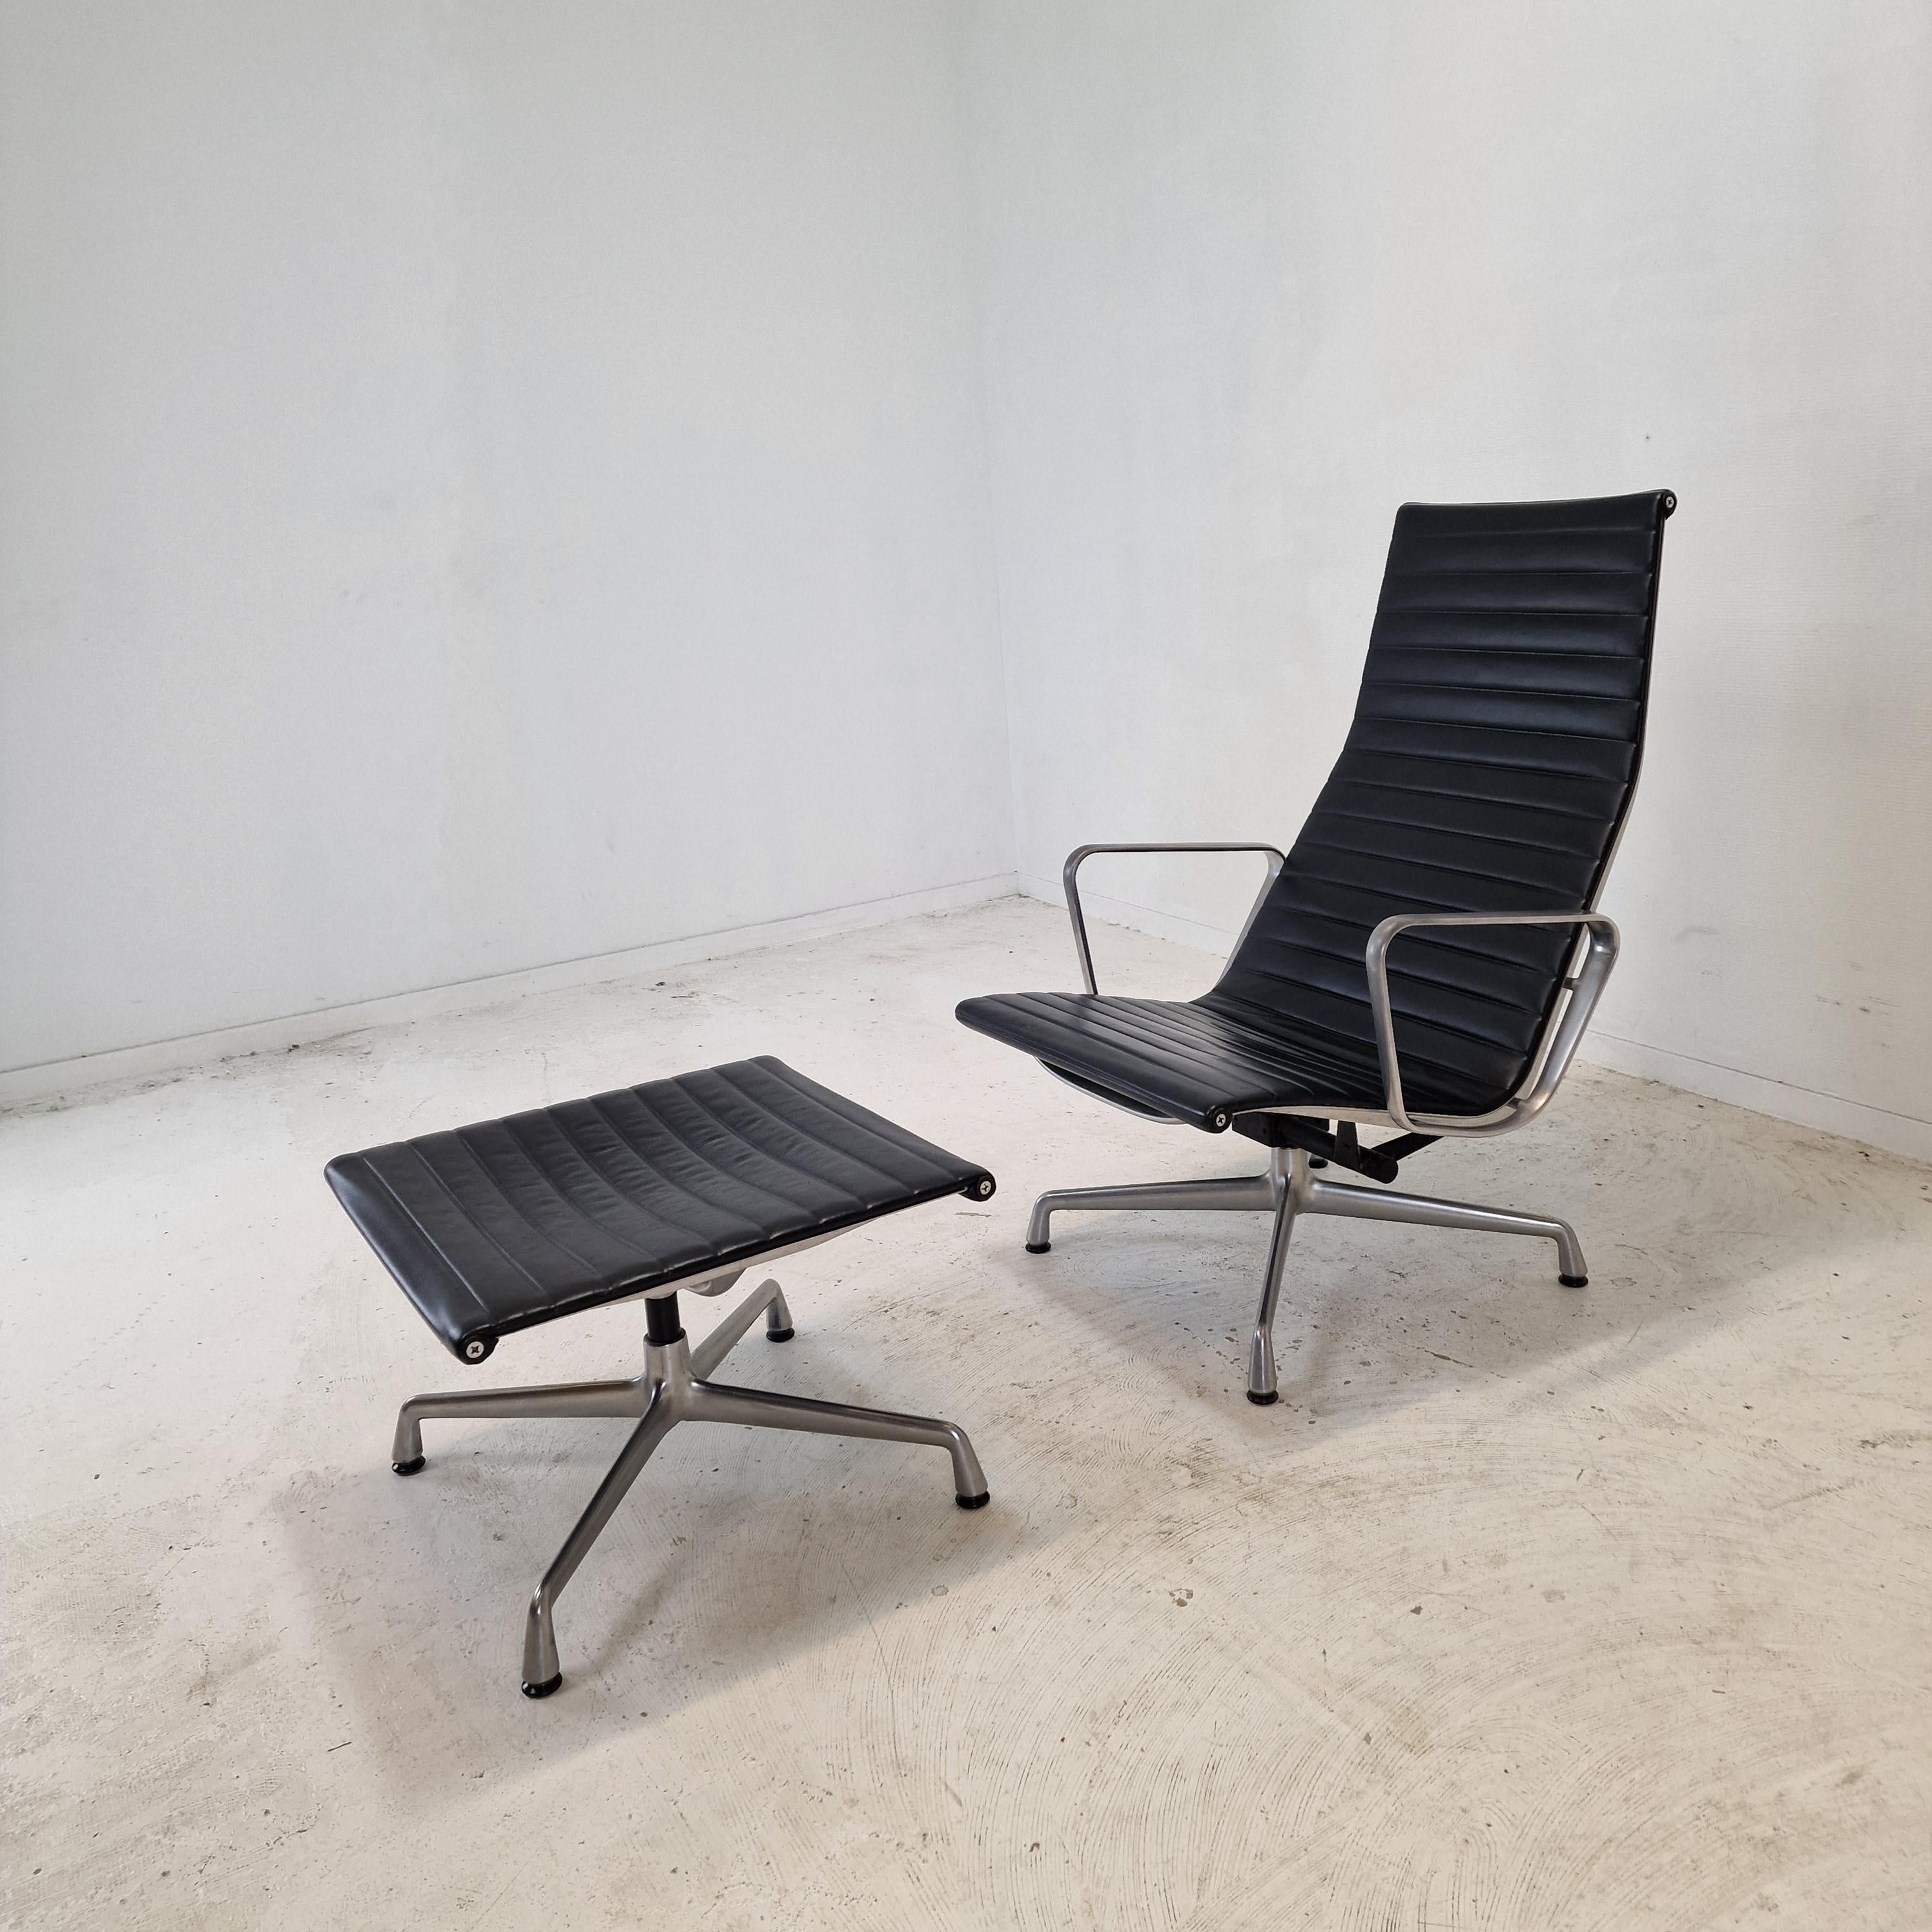 EA124 & EA125 aluminum armchair and footstool by Charles and Ray Eames for Vitra, fabricated in 1999.

The EA124 & EA125 aluminum armchair and footstool is one of the greatest furniture designs of the 20th century. 
Charles and Ray Eames designed